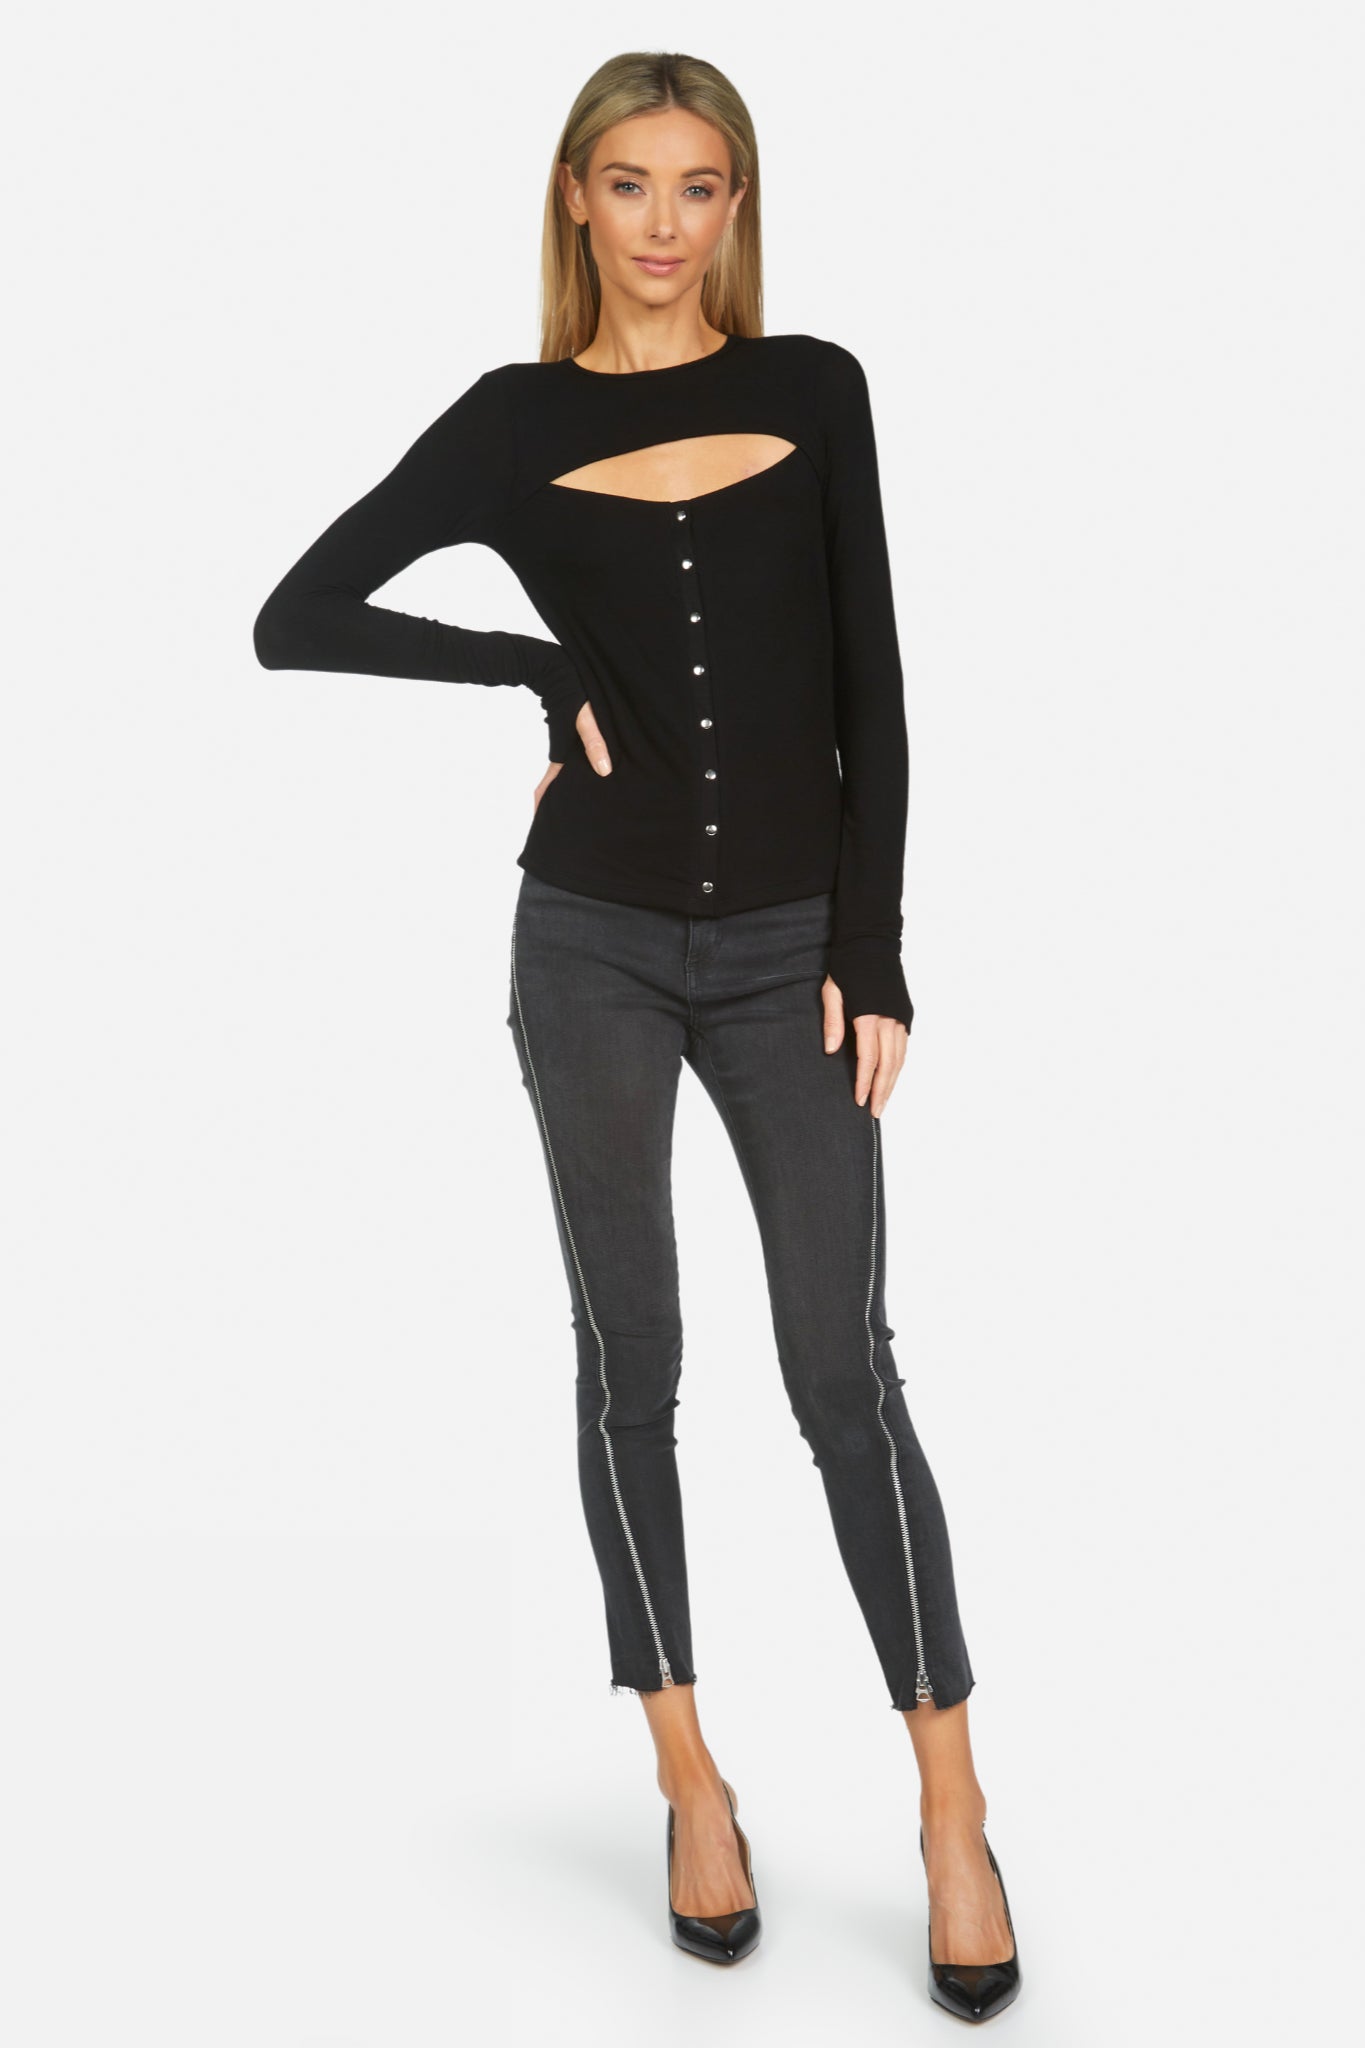 Manolo Cut Out Top